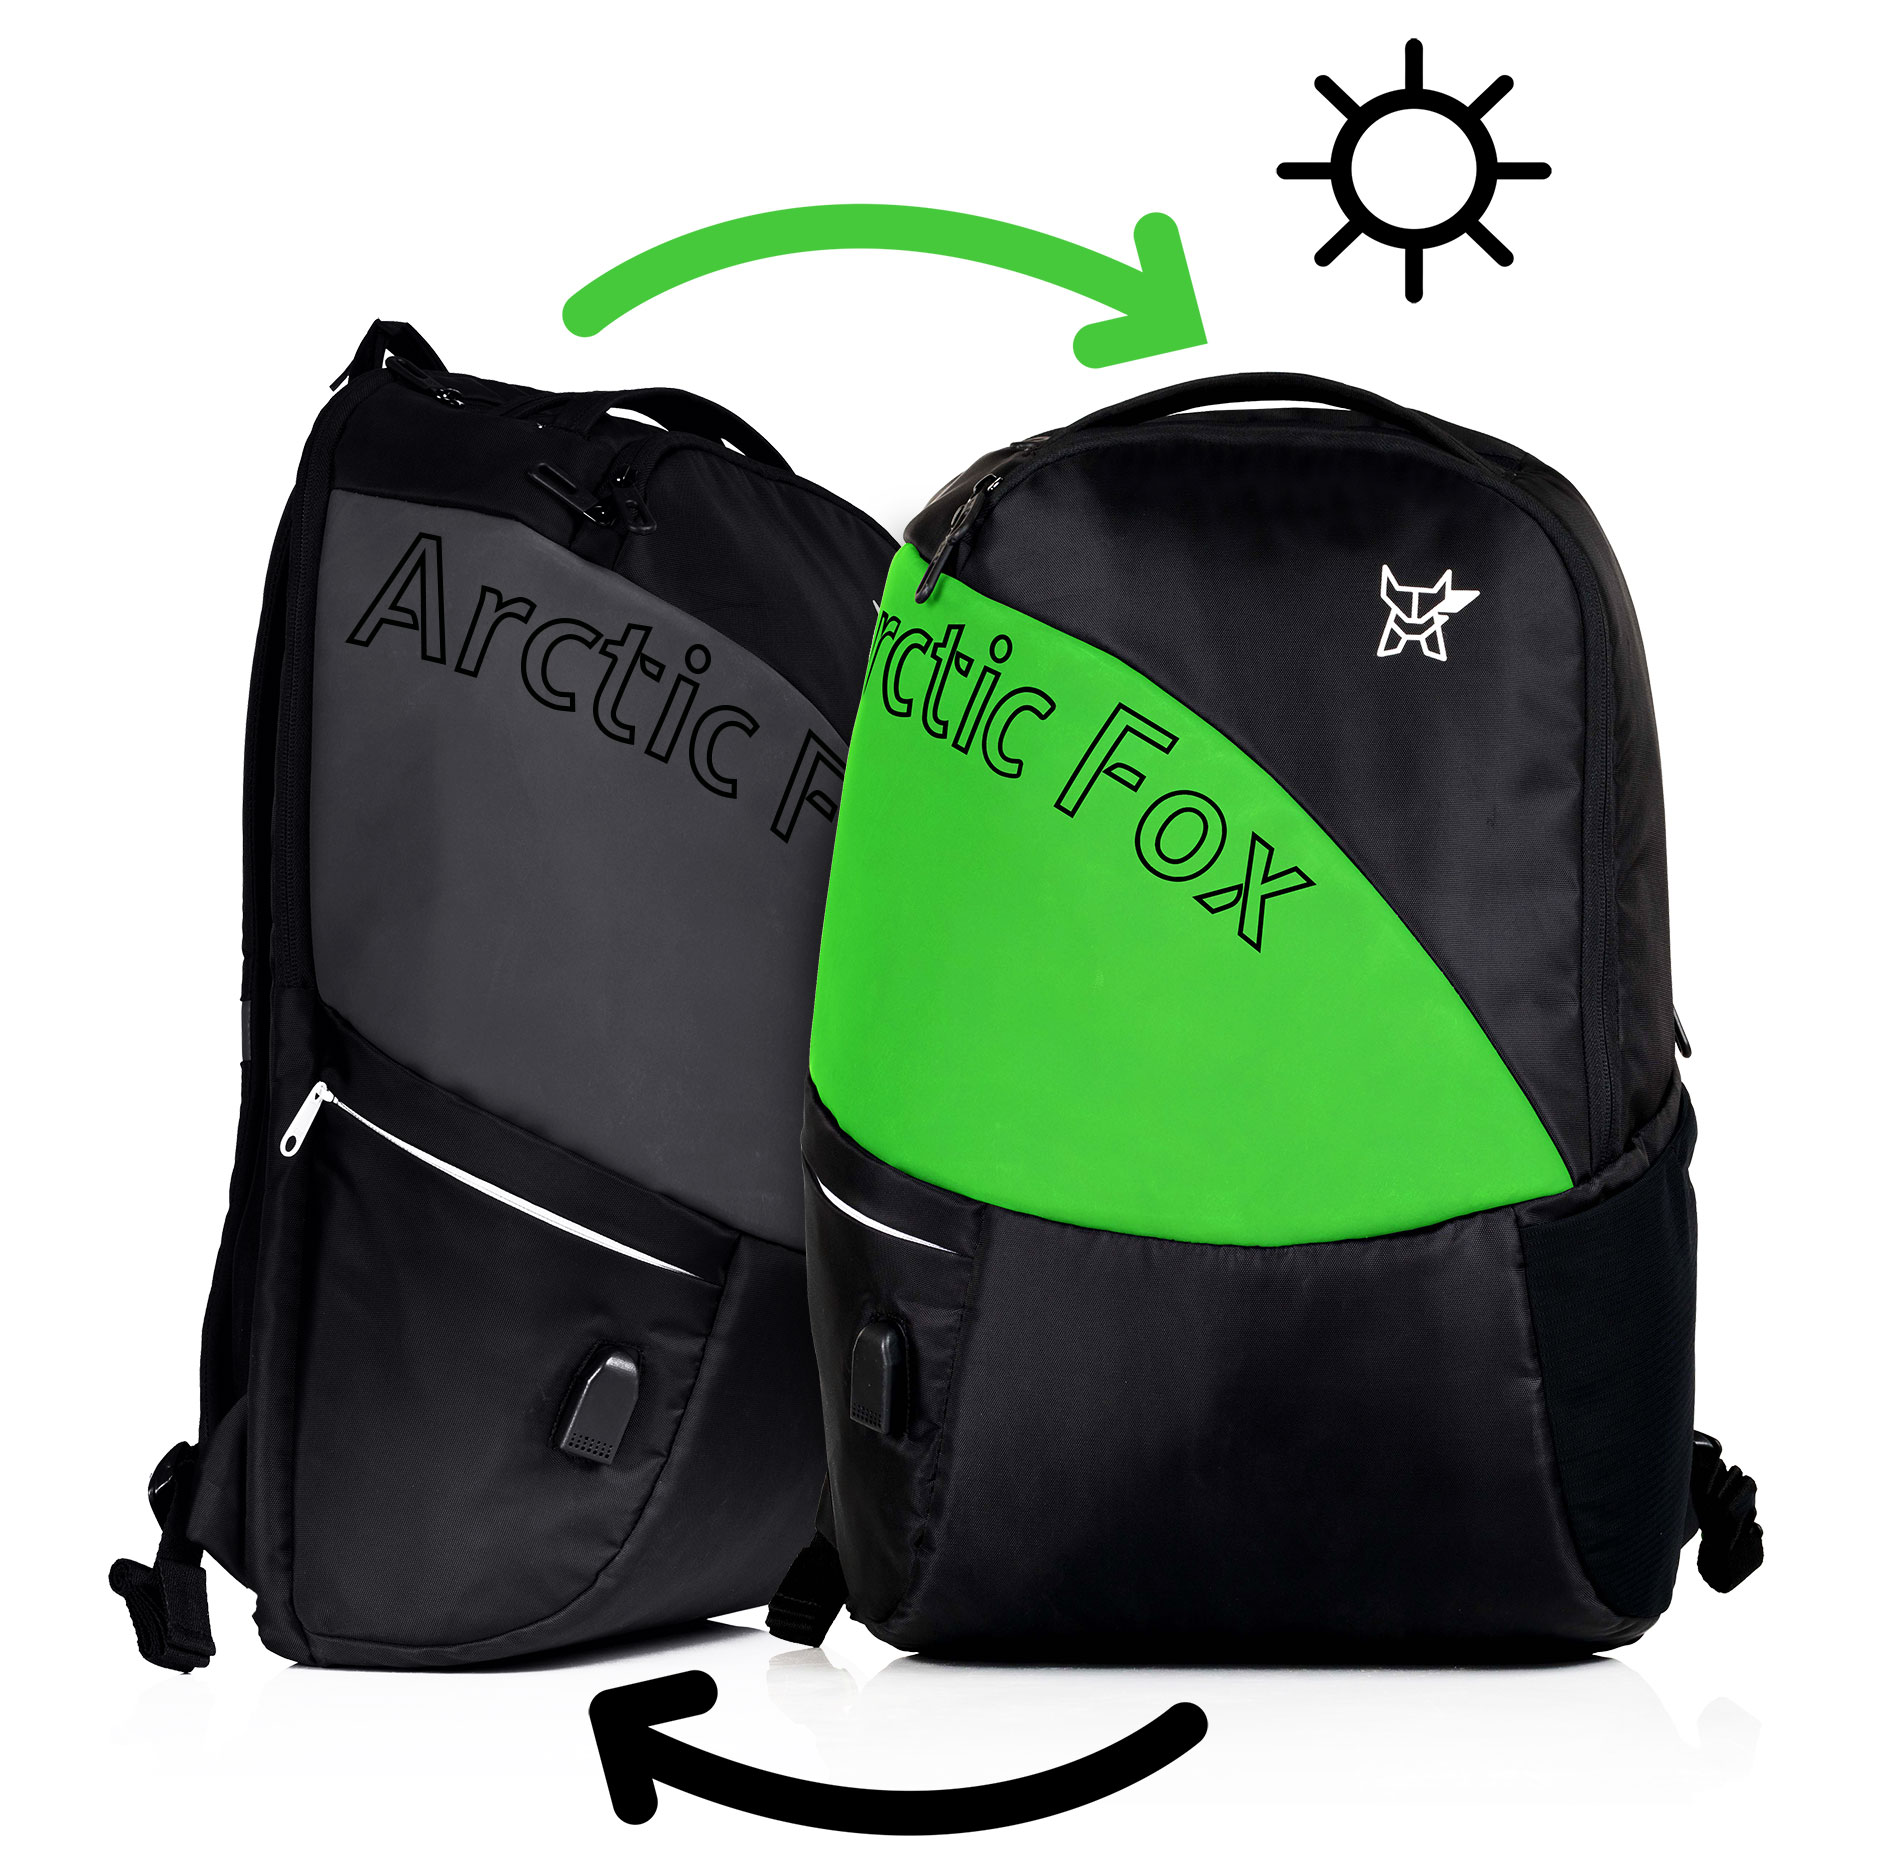 Bangalore-based Arctic Fox launches Colour Changing Backpacks with USB Port  - Shoes & Accessories